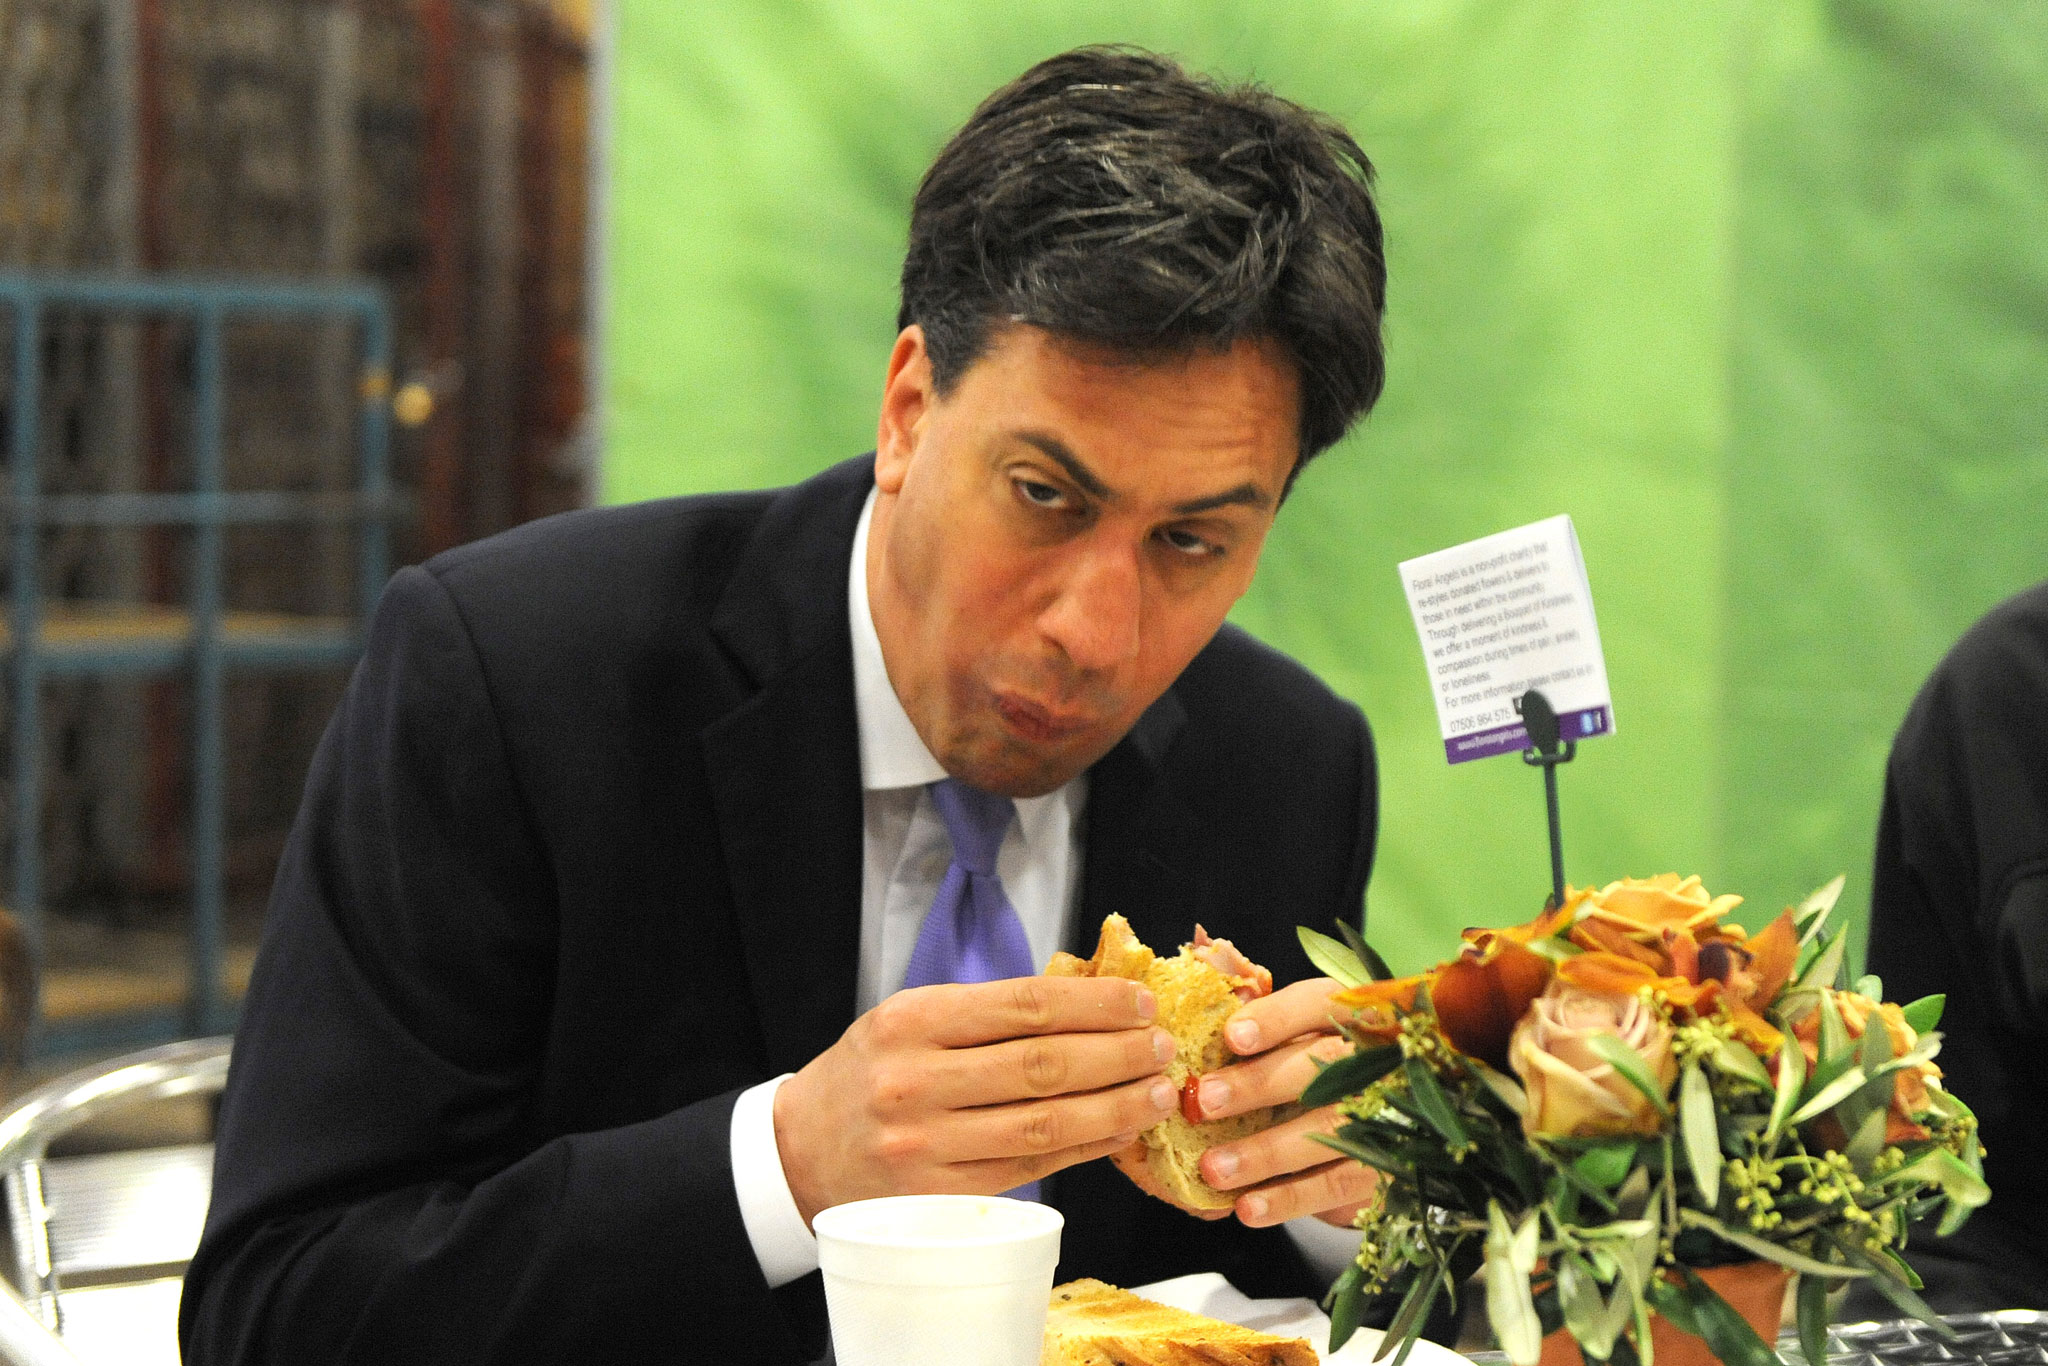 'Bacon Butty Ed': months after the event, the incident that typified, for the right-wing media, Ed Miliband’s lack of ordinary blokeishness, is still highlighted (Jeremy Selwyn)